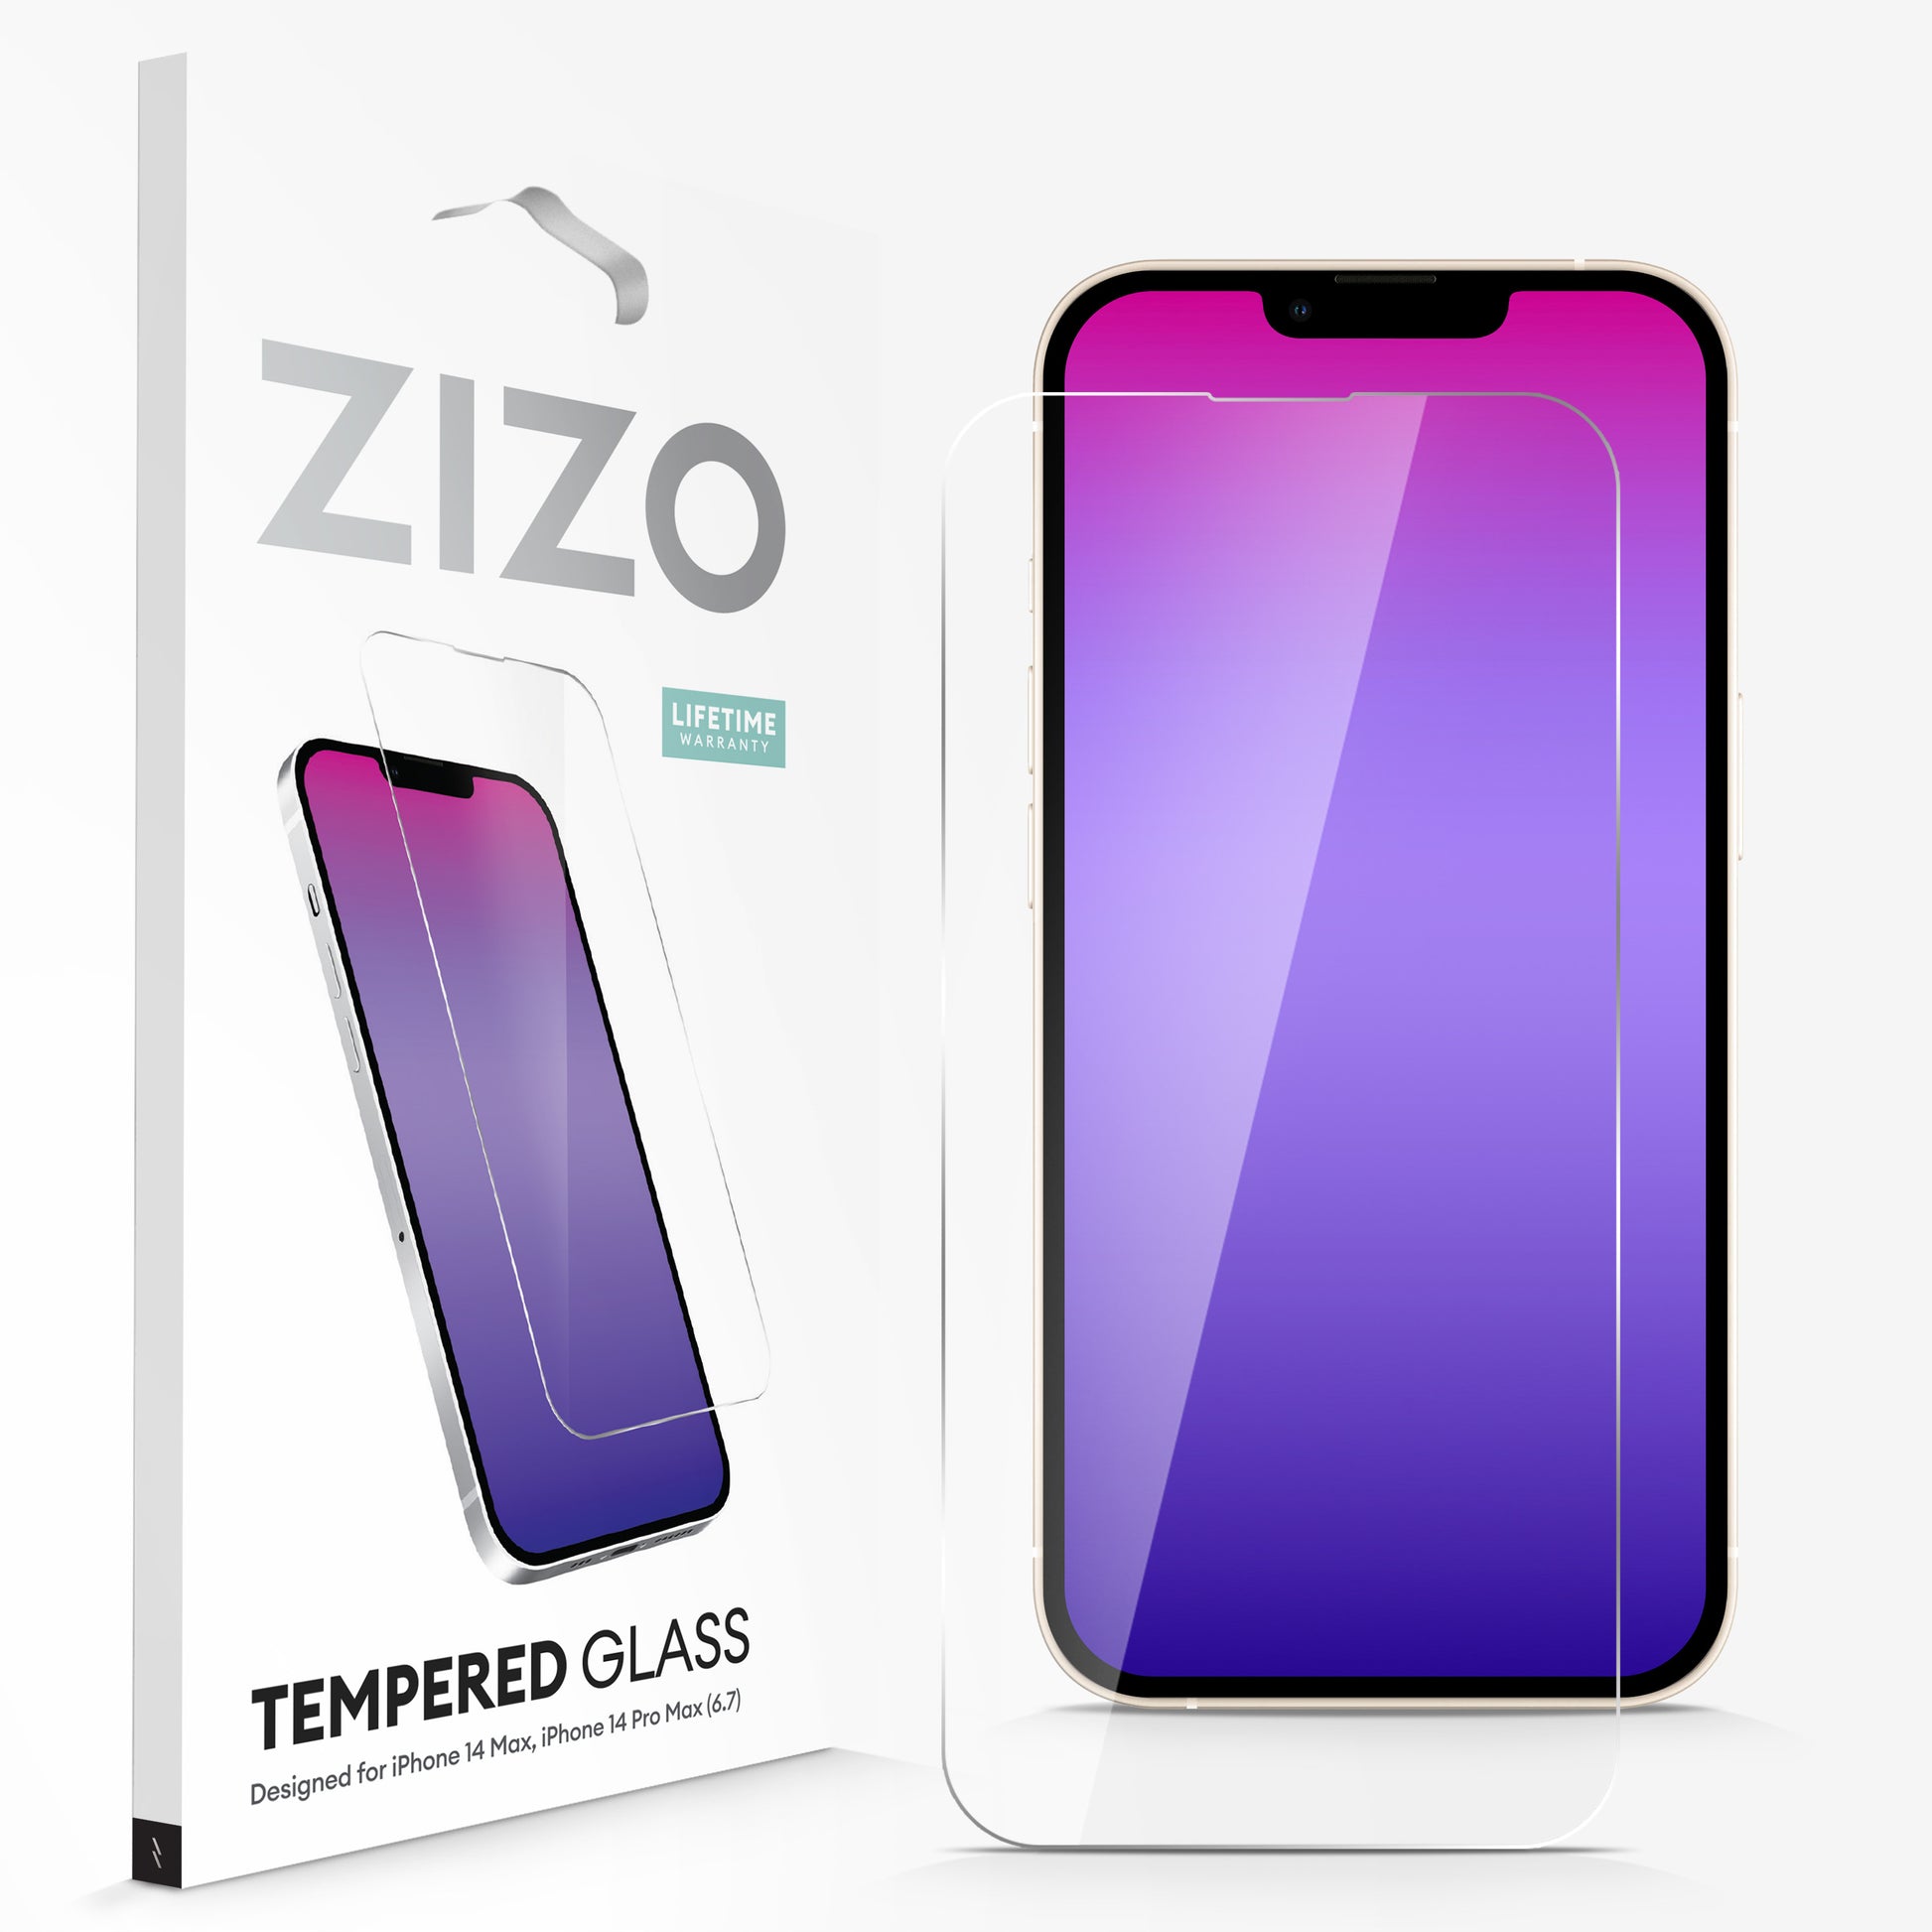 ZIZO TEMPERED GLASS Screen Protector for iPhone 14 Max (6.7) - Clear